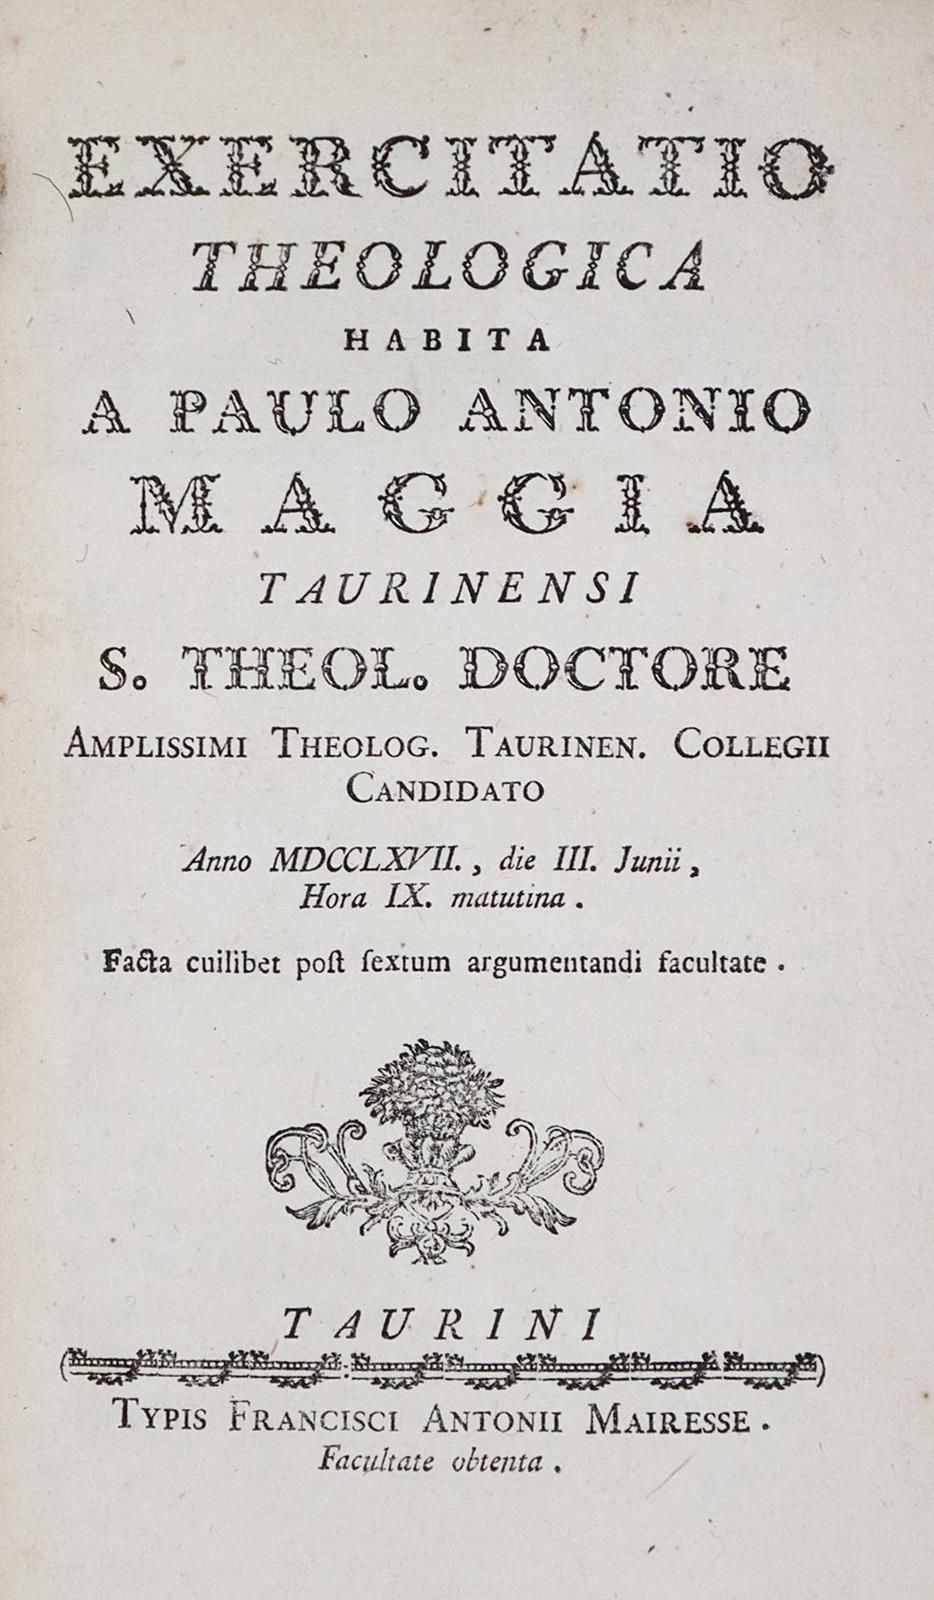 Maggia,P.A. Exercitatio theologica habita a .... Floral.都灵，F.A.Mairesse 1767。18世&hellip;